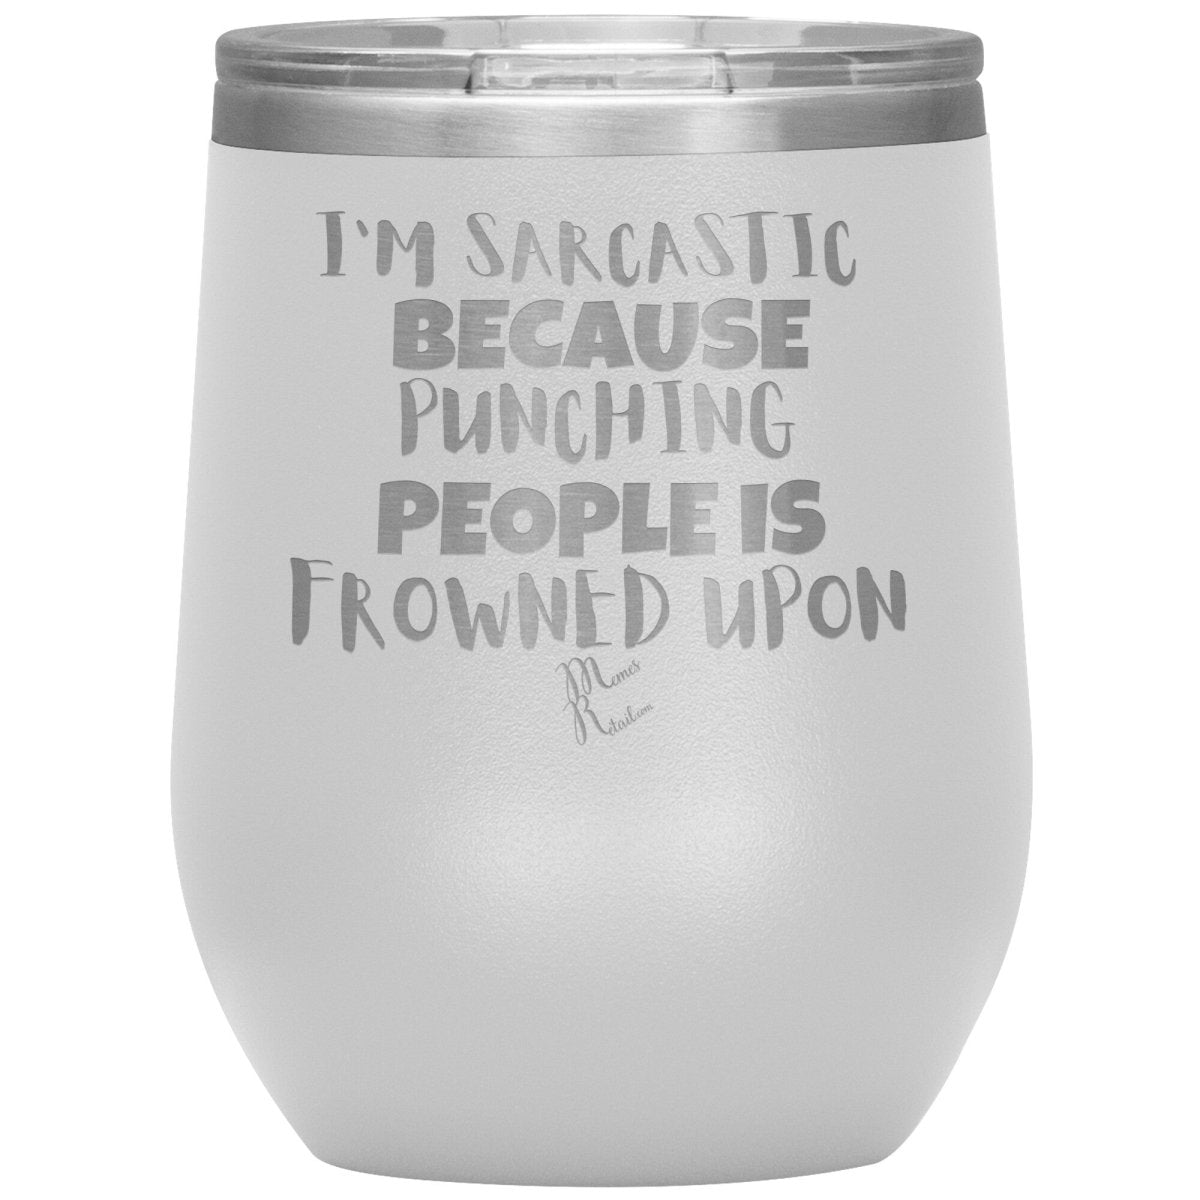 I'm Sarcastic Because Punching People is Frowned Upon Tumblers, 12oz Wine Insulated Tumbler / White - MemesRetail.com